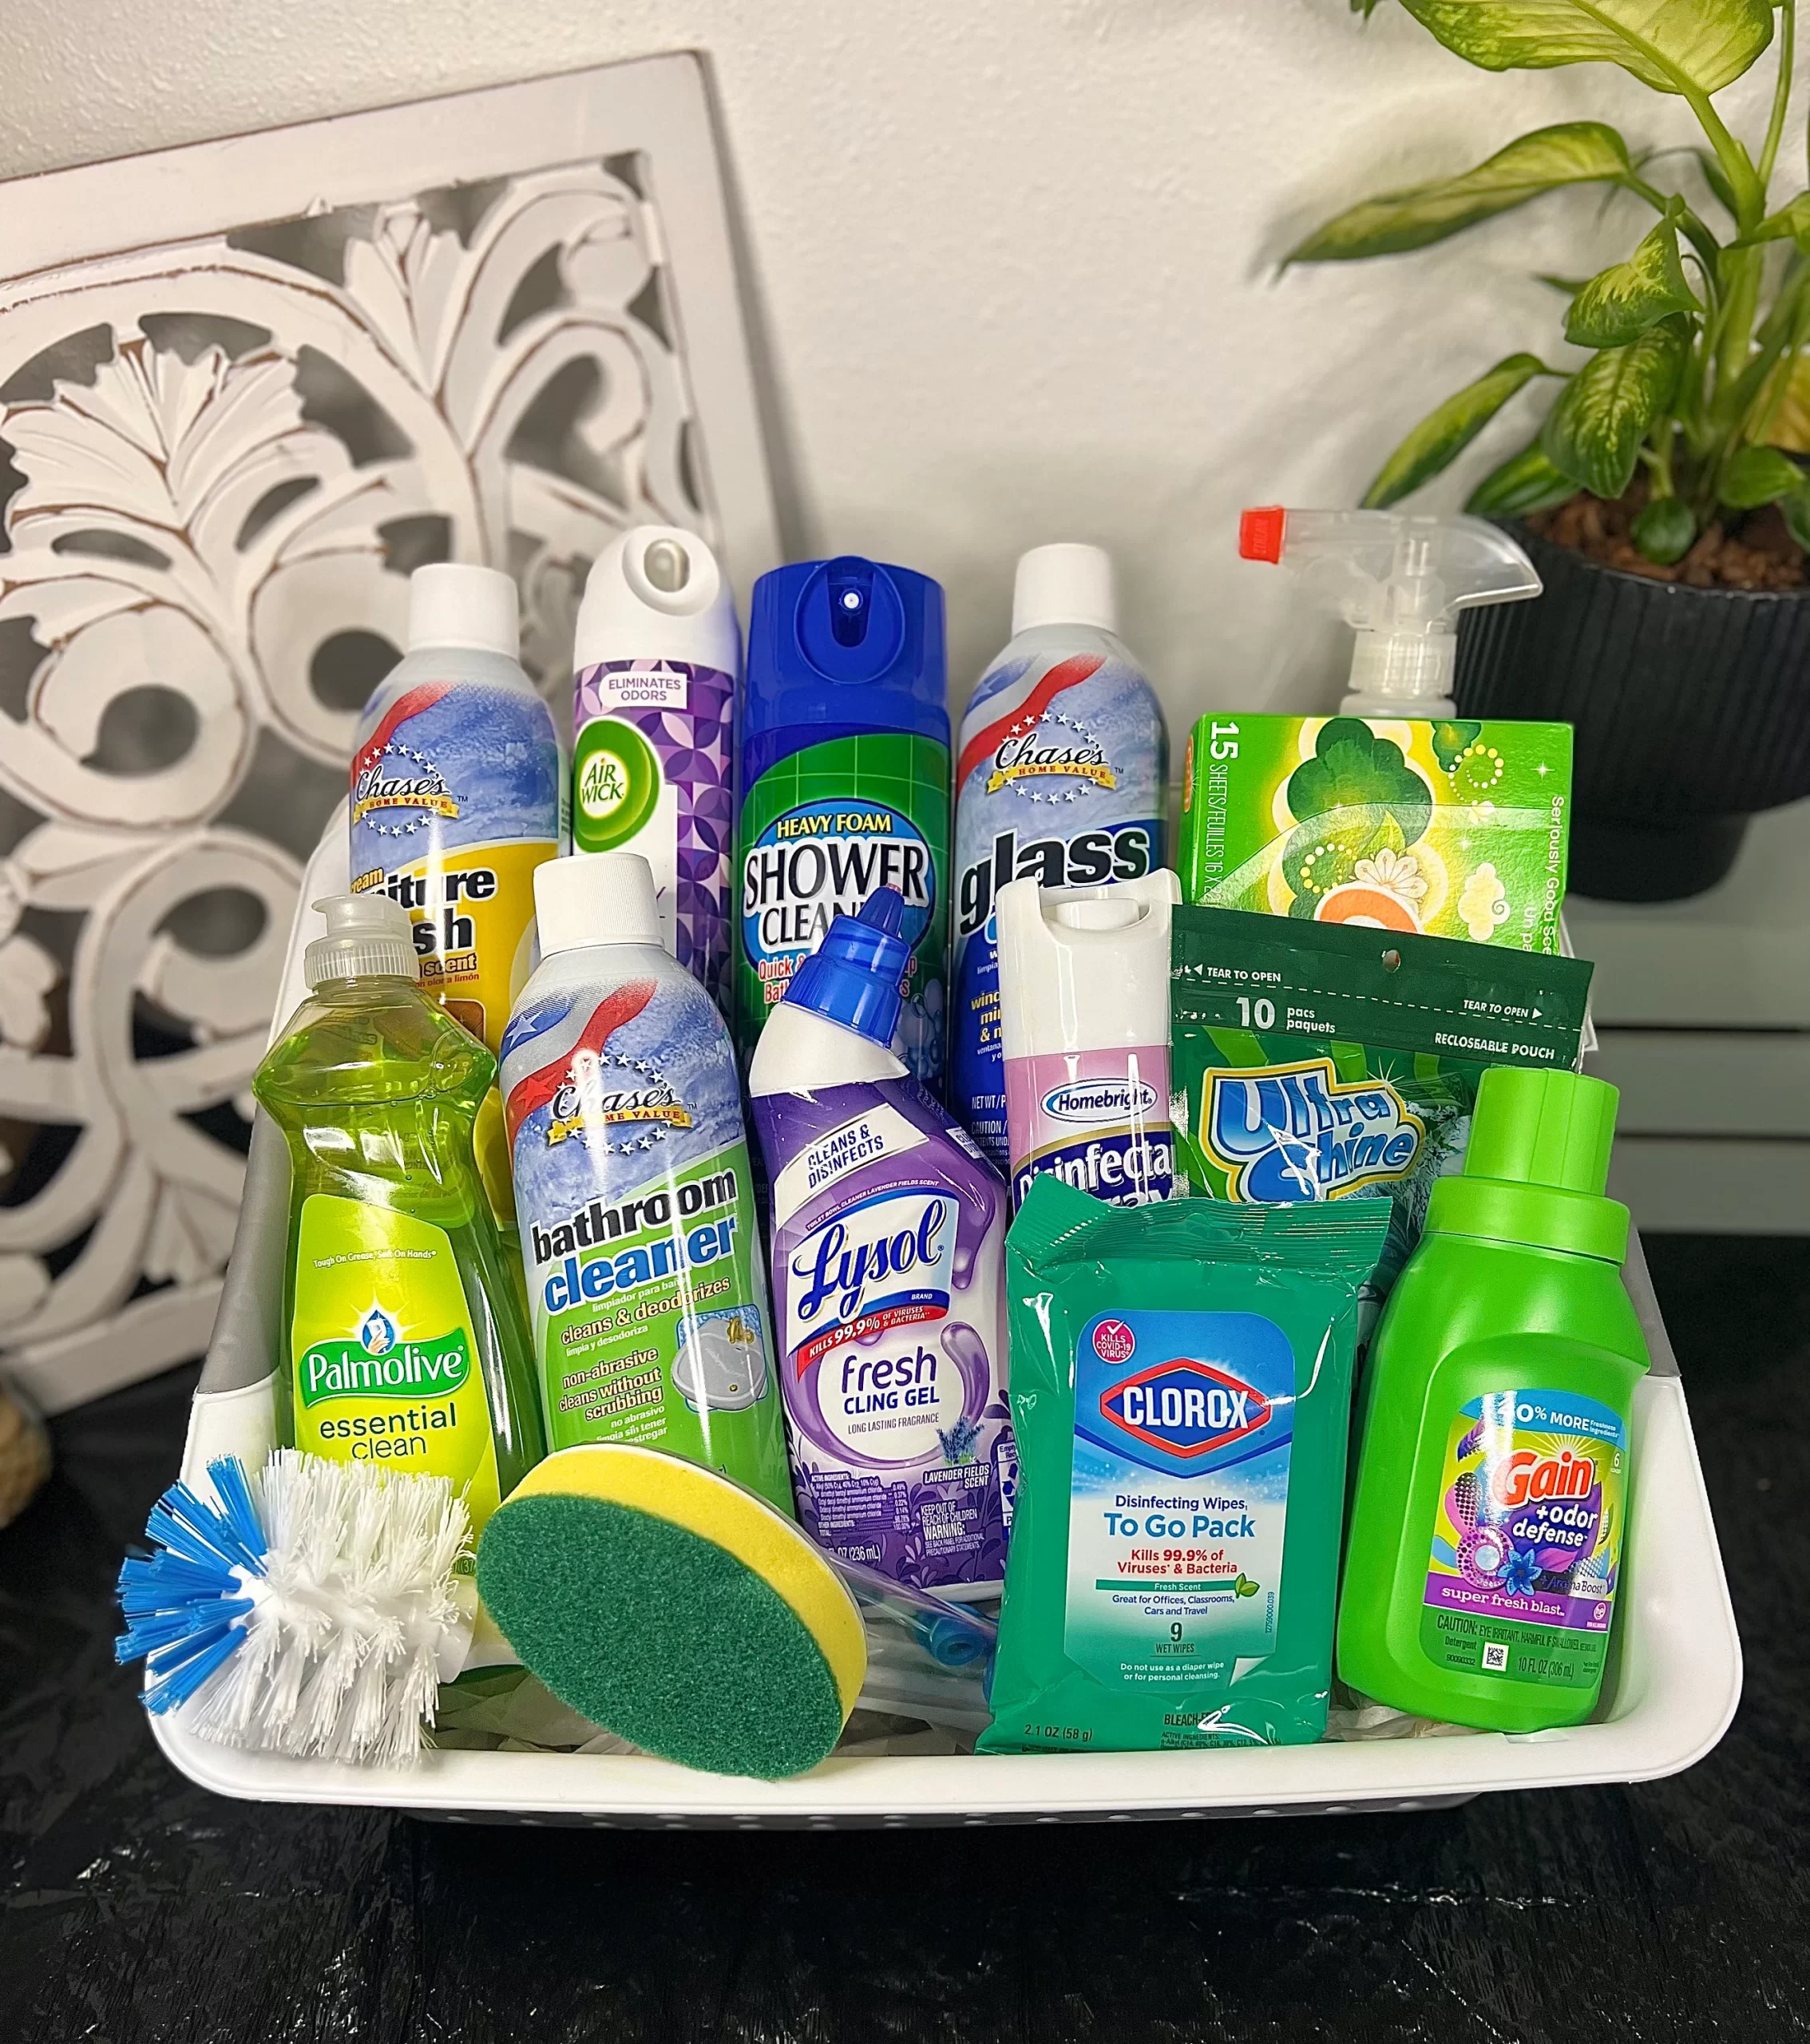 “Cleaning Hacks: Clever Uses for Common Household Supplies”